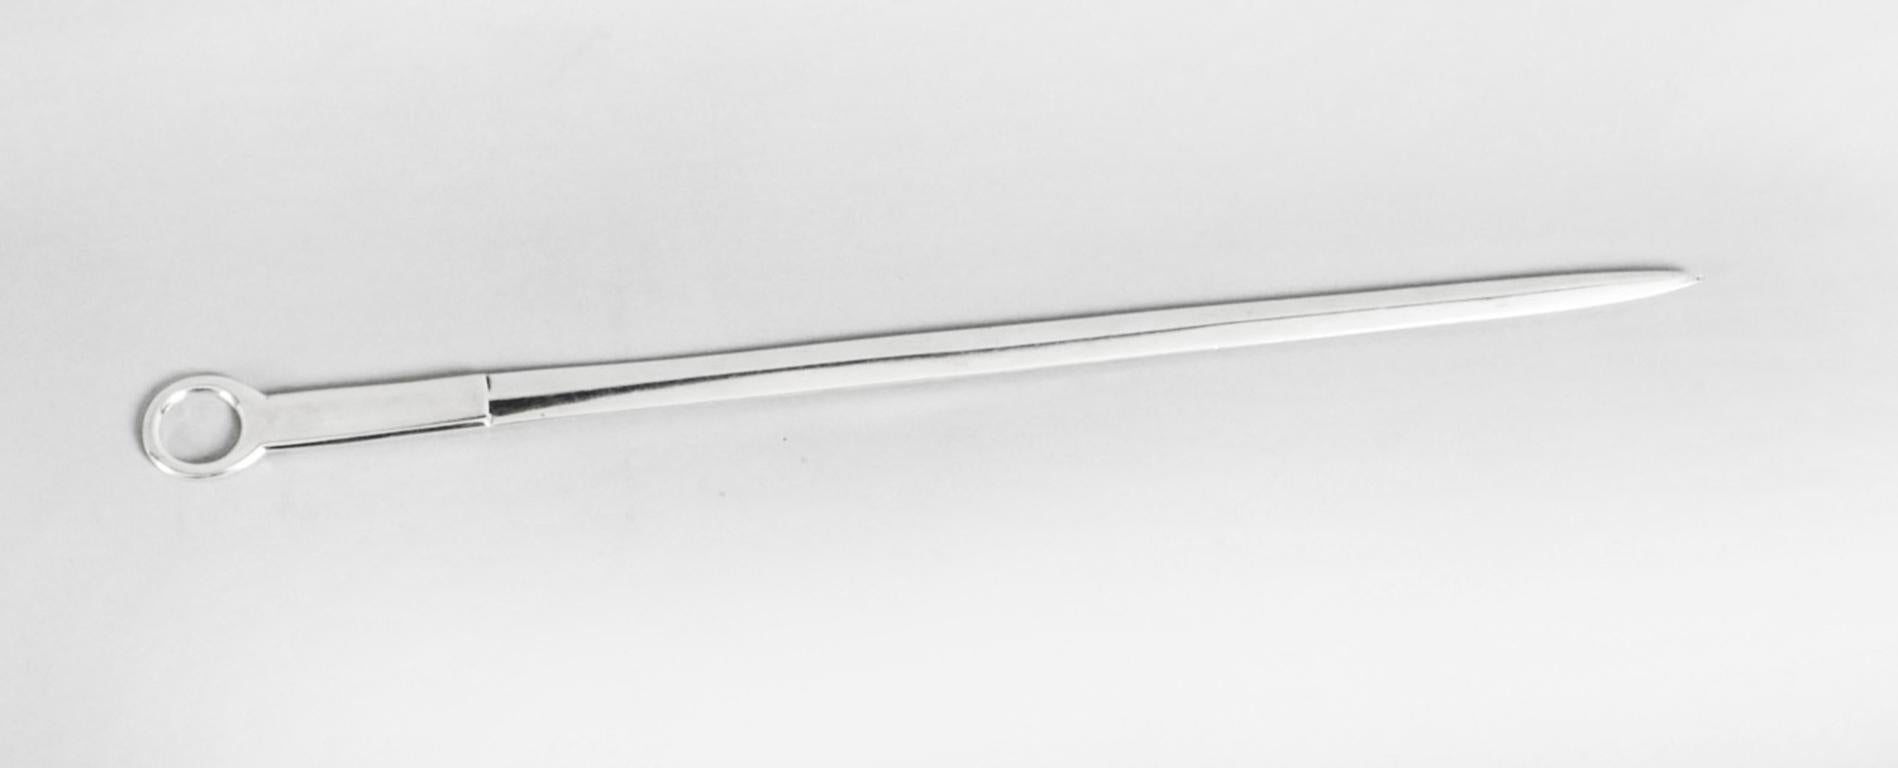 This is an exceptionally fine antique English George III sterling silver meat skewer by the world-famous silversmith Paul Storr, with hallmarks for London, 1808, 19th century.
This magnificent meat skewer is of plain tapering form with ring